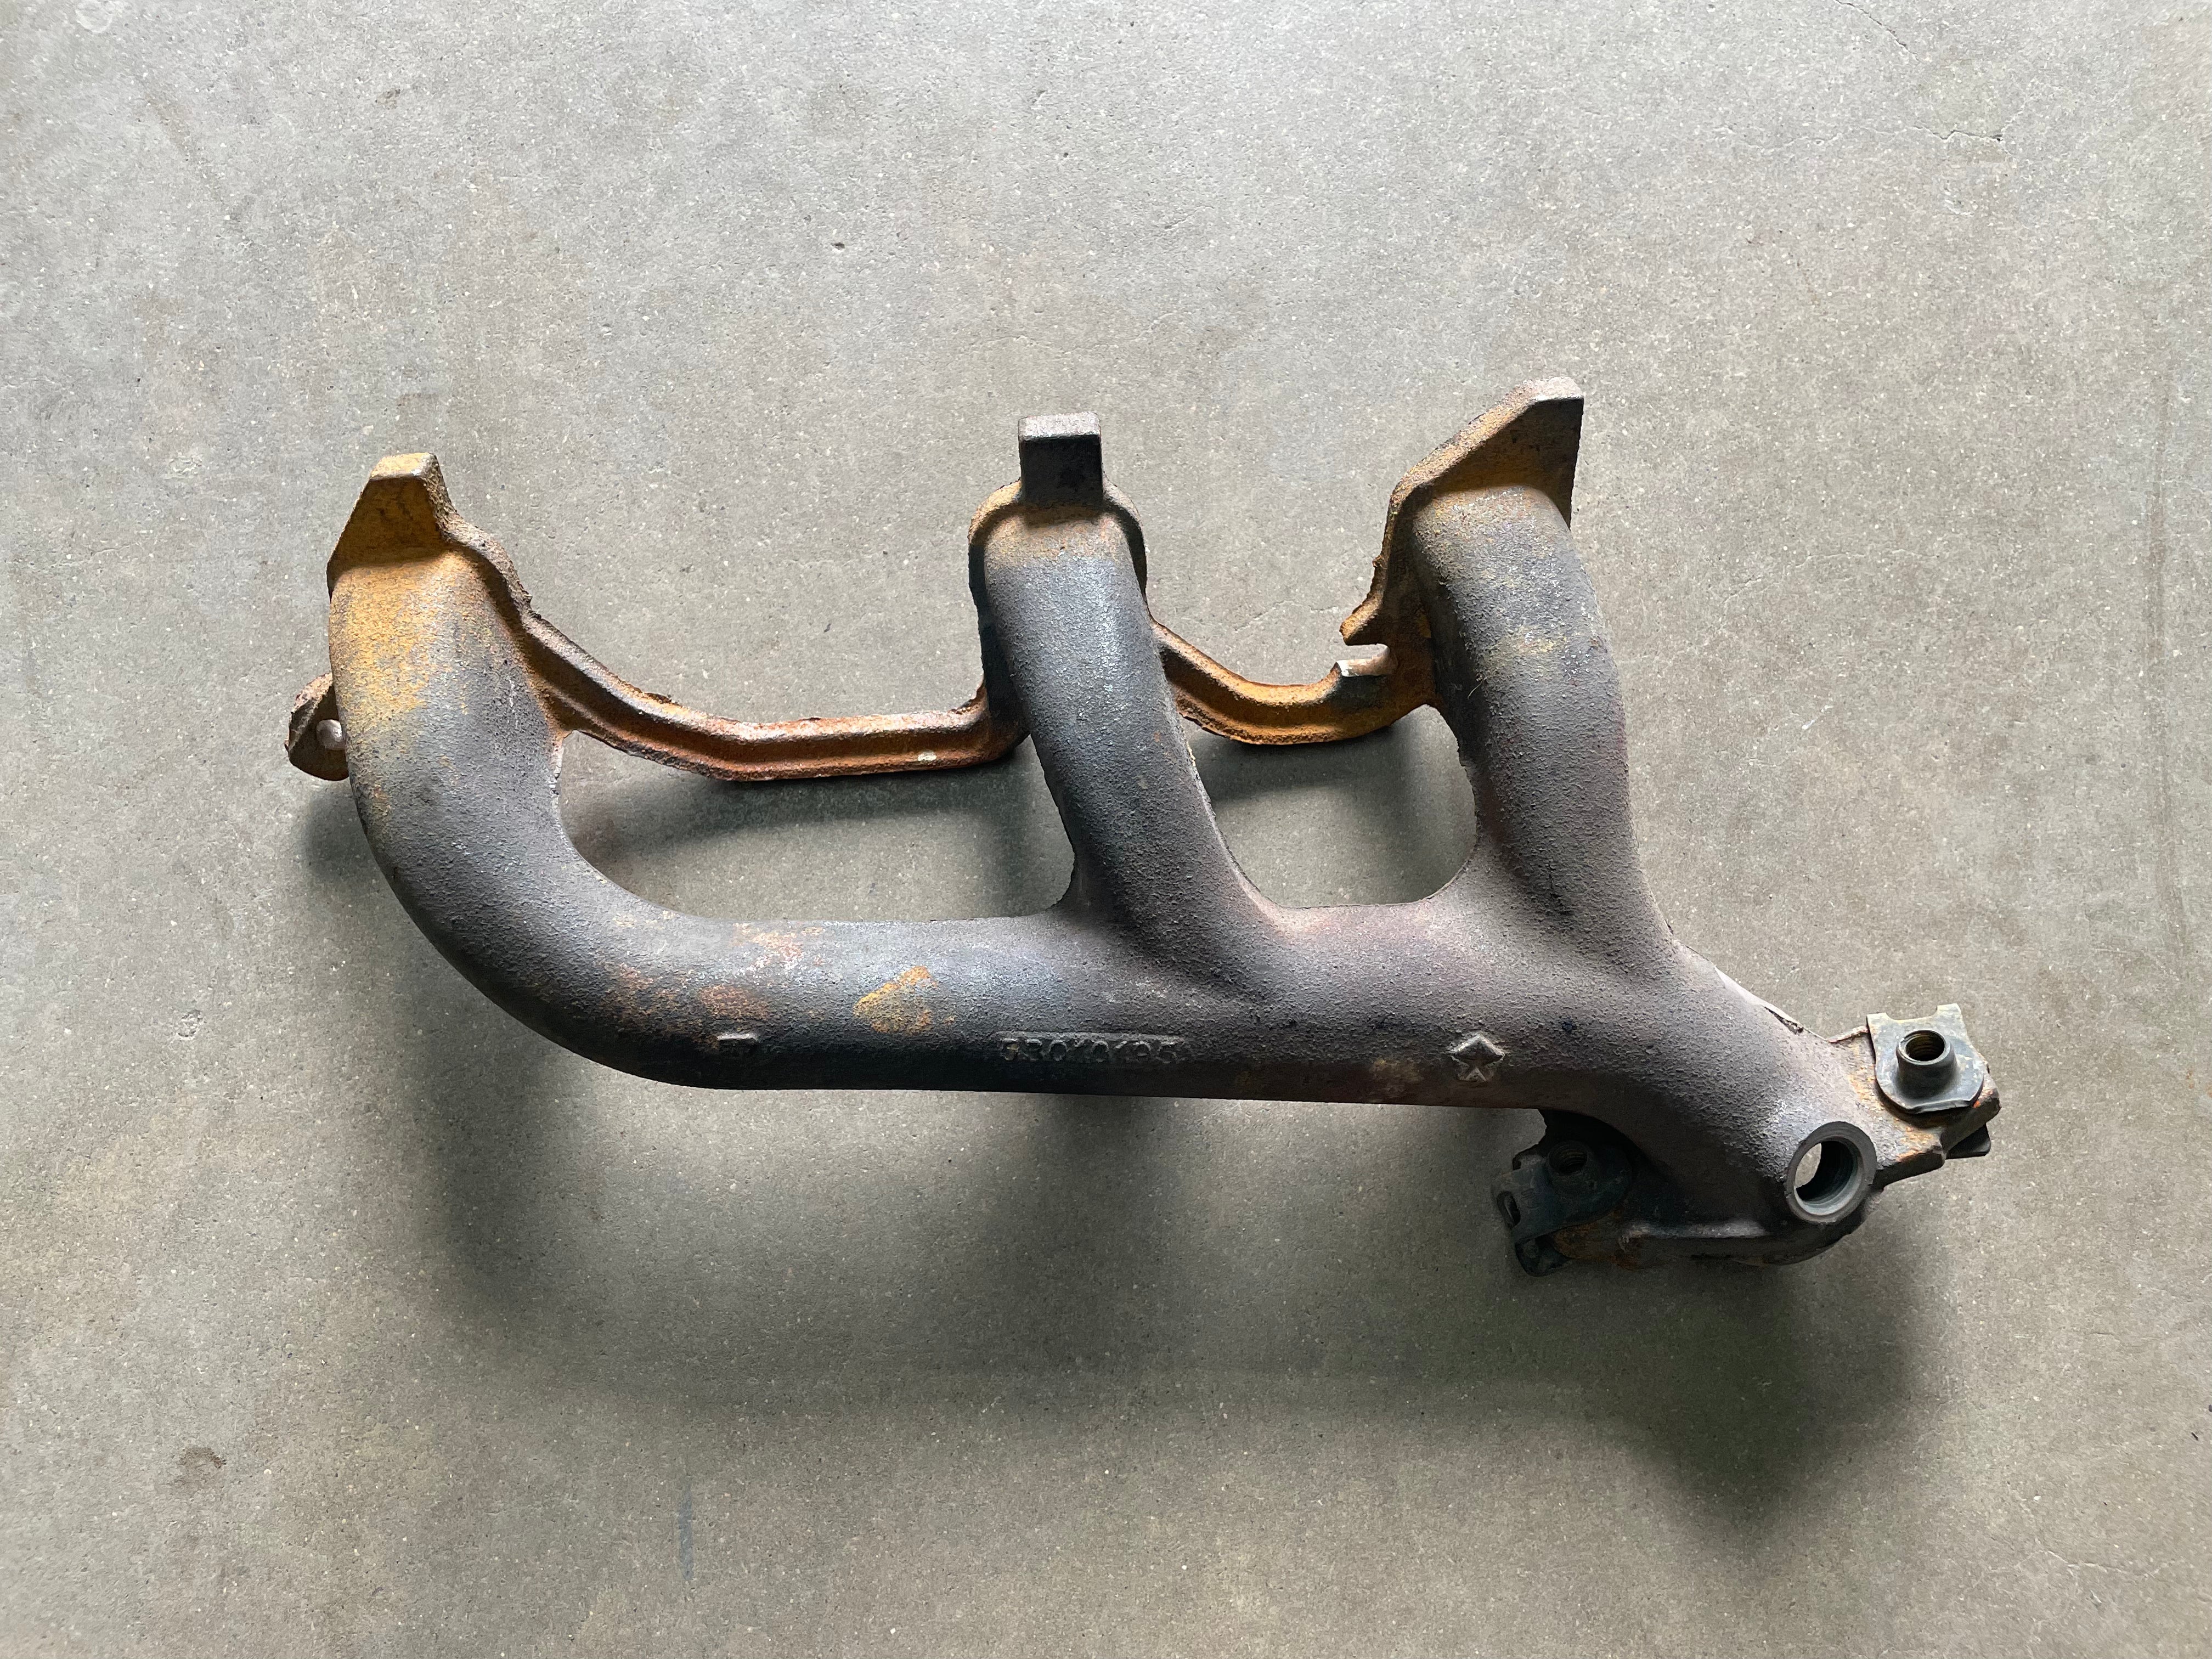  I6 Front Exhaust Manifold for Wrangler TJ (99-06), Cherokee XJ (9 | FN  Jeep